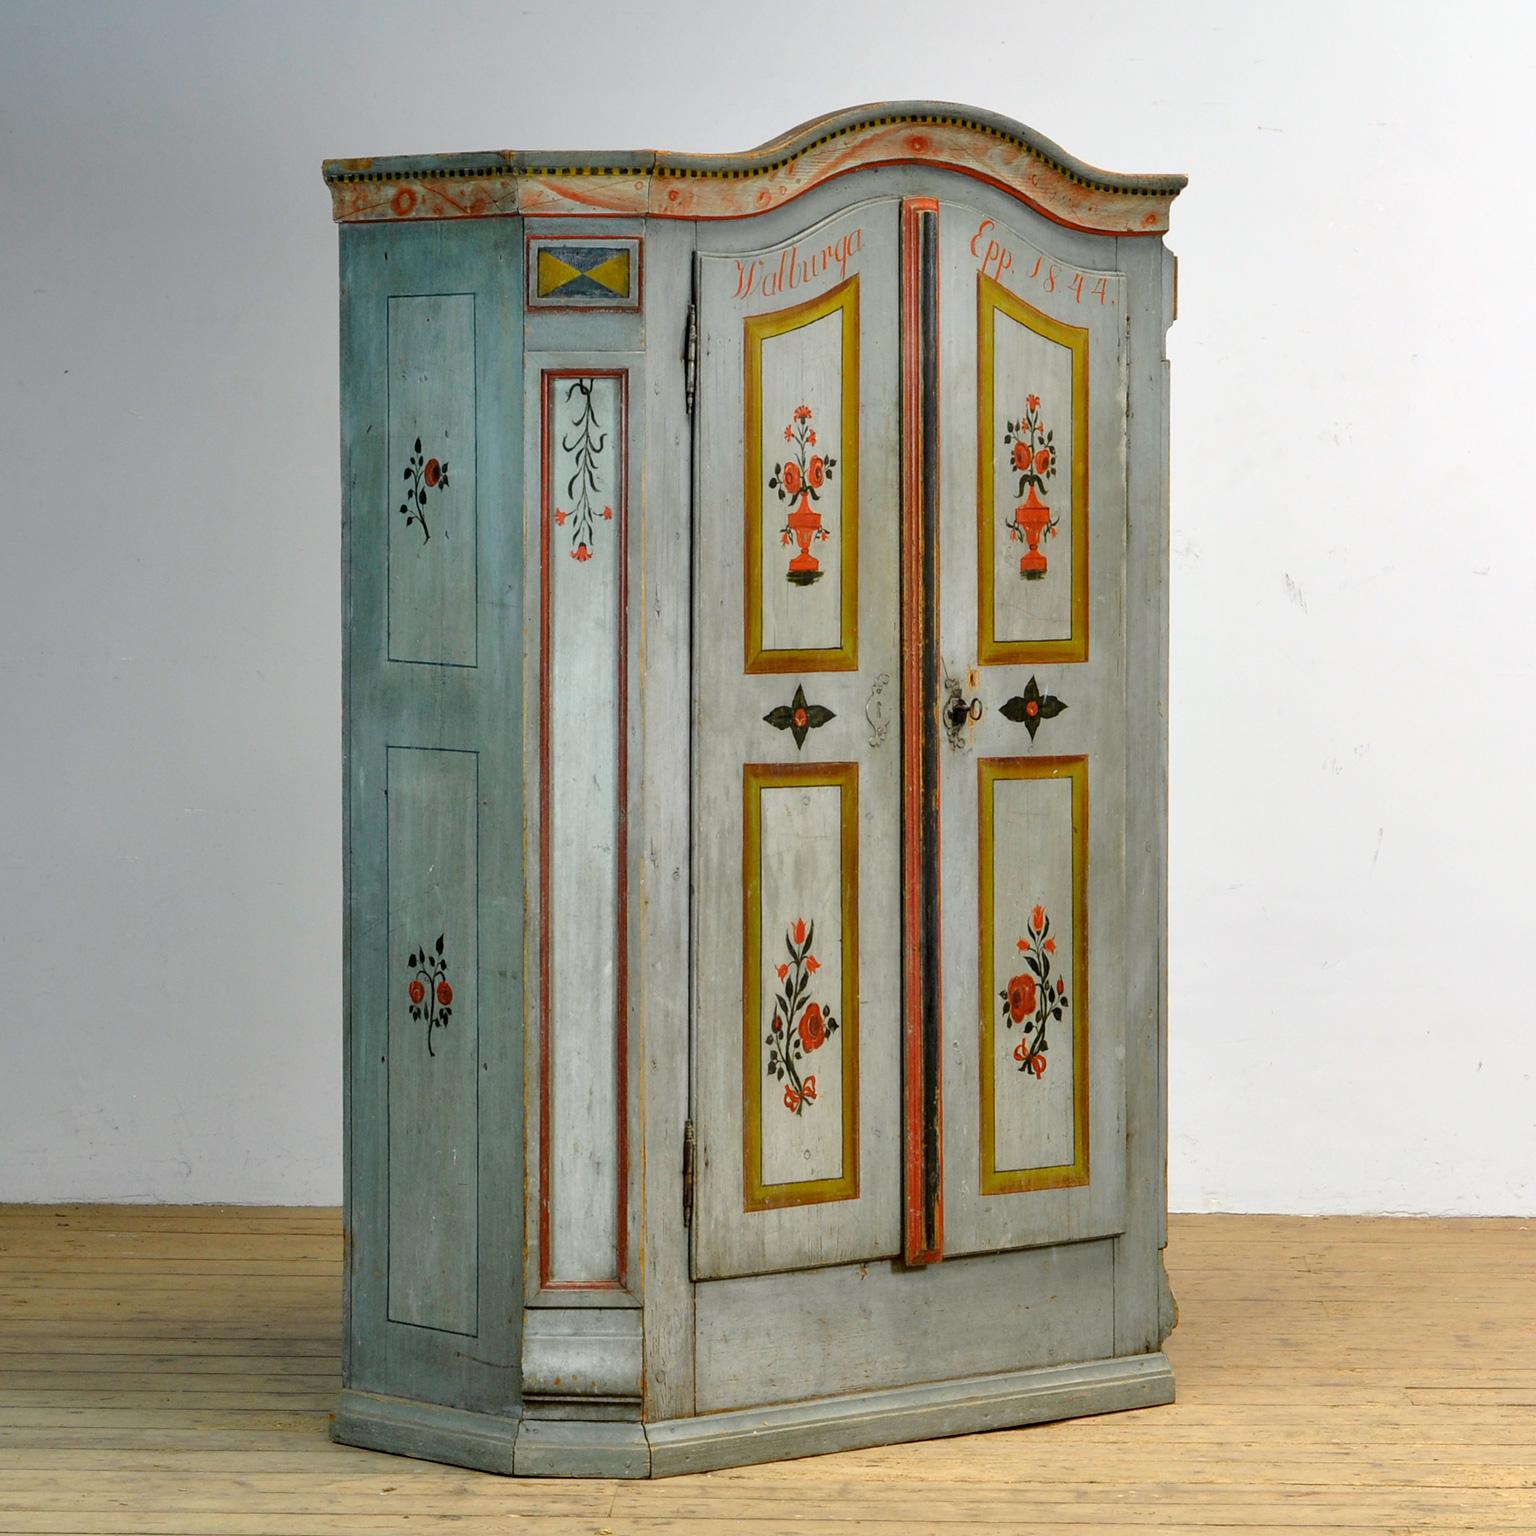 A pine cupboard from rural southern Germany, dating from 1844. The cupboard was probably given as a wedding gift. This cabinet is made of solid pine and is hand-painted in vibrant colors. 2 drawers on the inside, 3 shelves on the left and a rod on